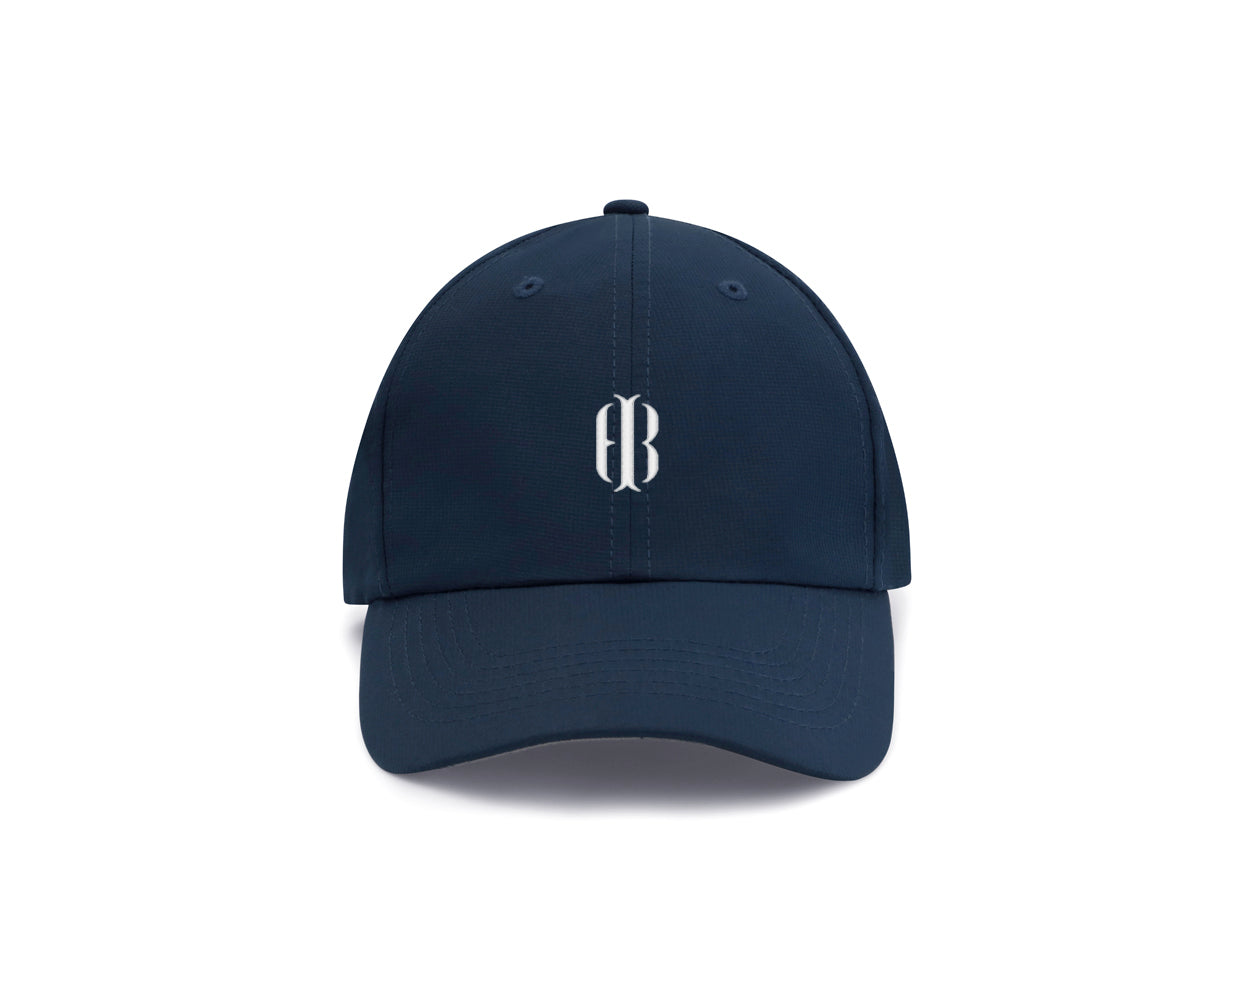 White and navy hat with white Holderness and Bourne embroidered logo.